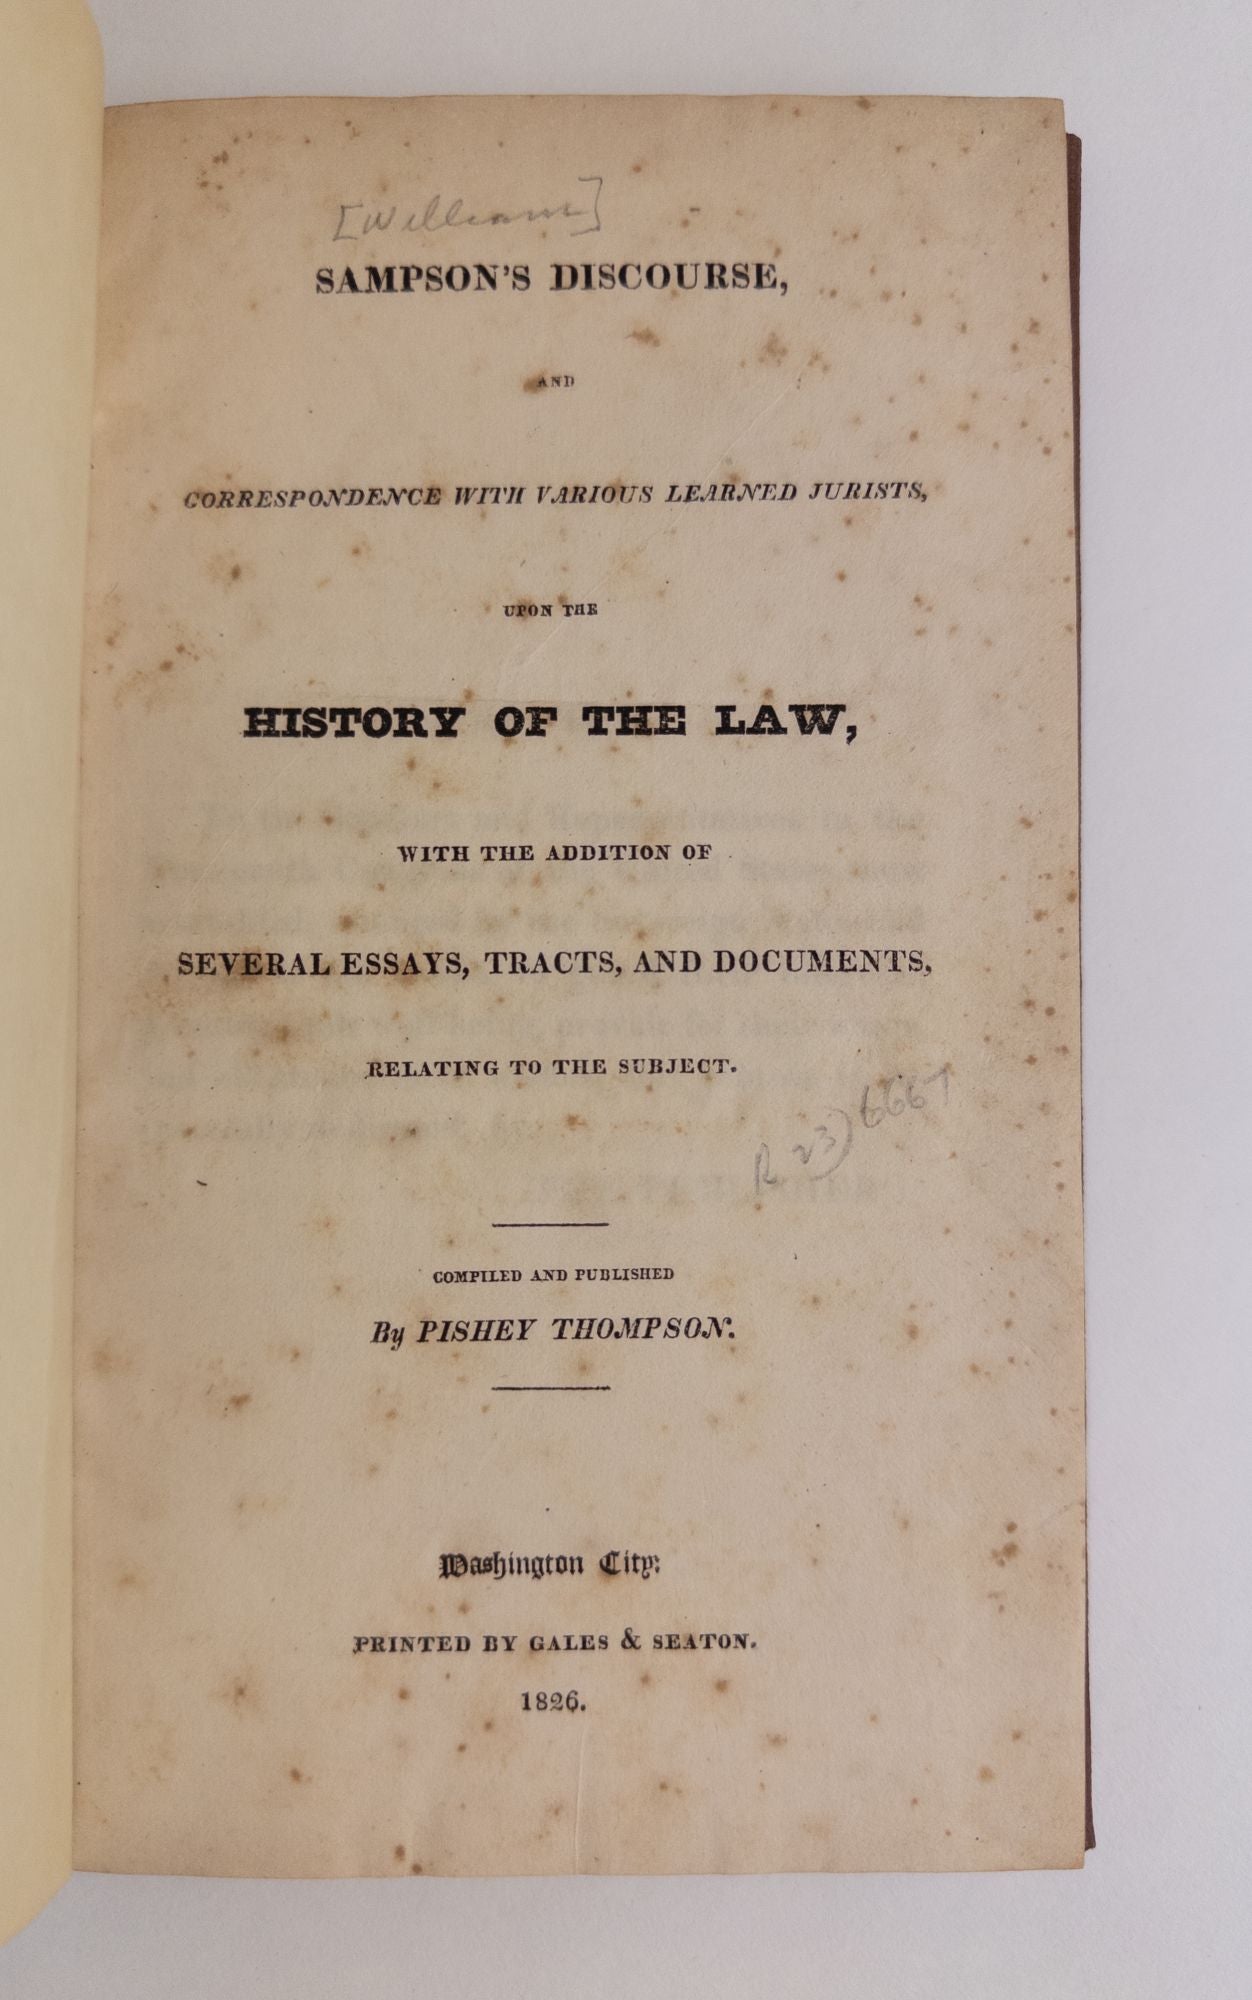 Product Image for SAMPSON'S DISCOURSE, AND CORRESPONDENCE WITH VARIOUS LEARNED JURISTS, UPON THE HISTORY OF THE LAW